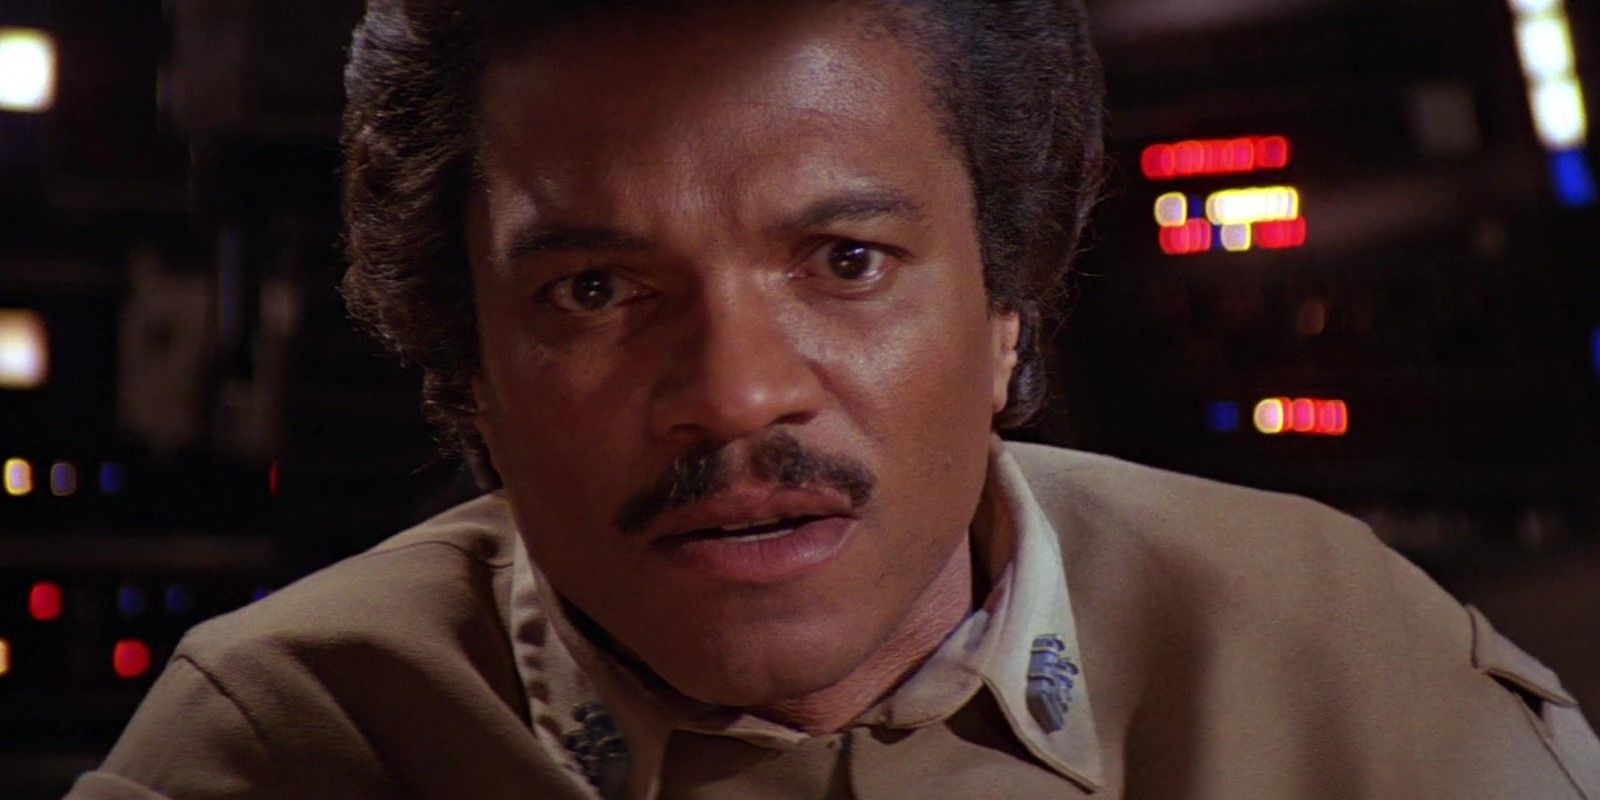 Lando Calrissian (Billy Dee Williams) in the cockpit of the Millennium Falcon during the Battle of Endor in Star Wars: Episode VI - Return of the Jedi